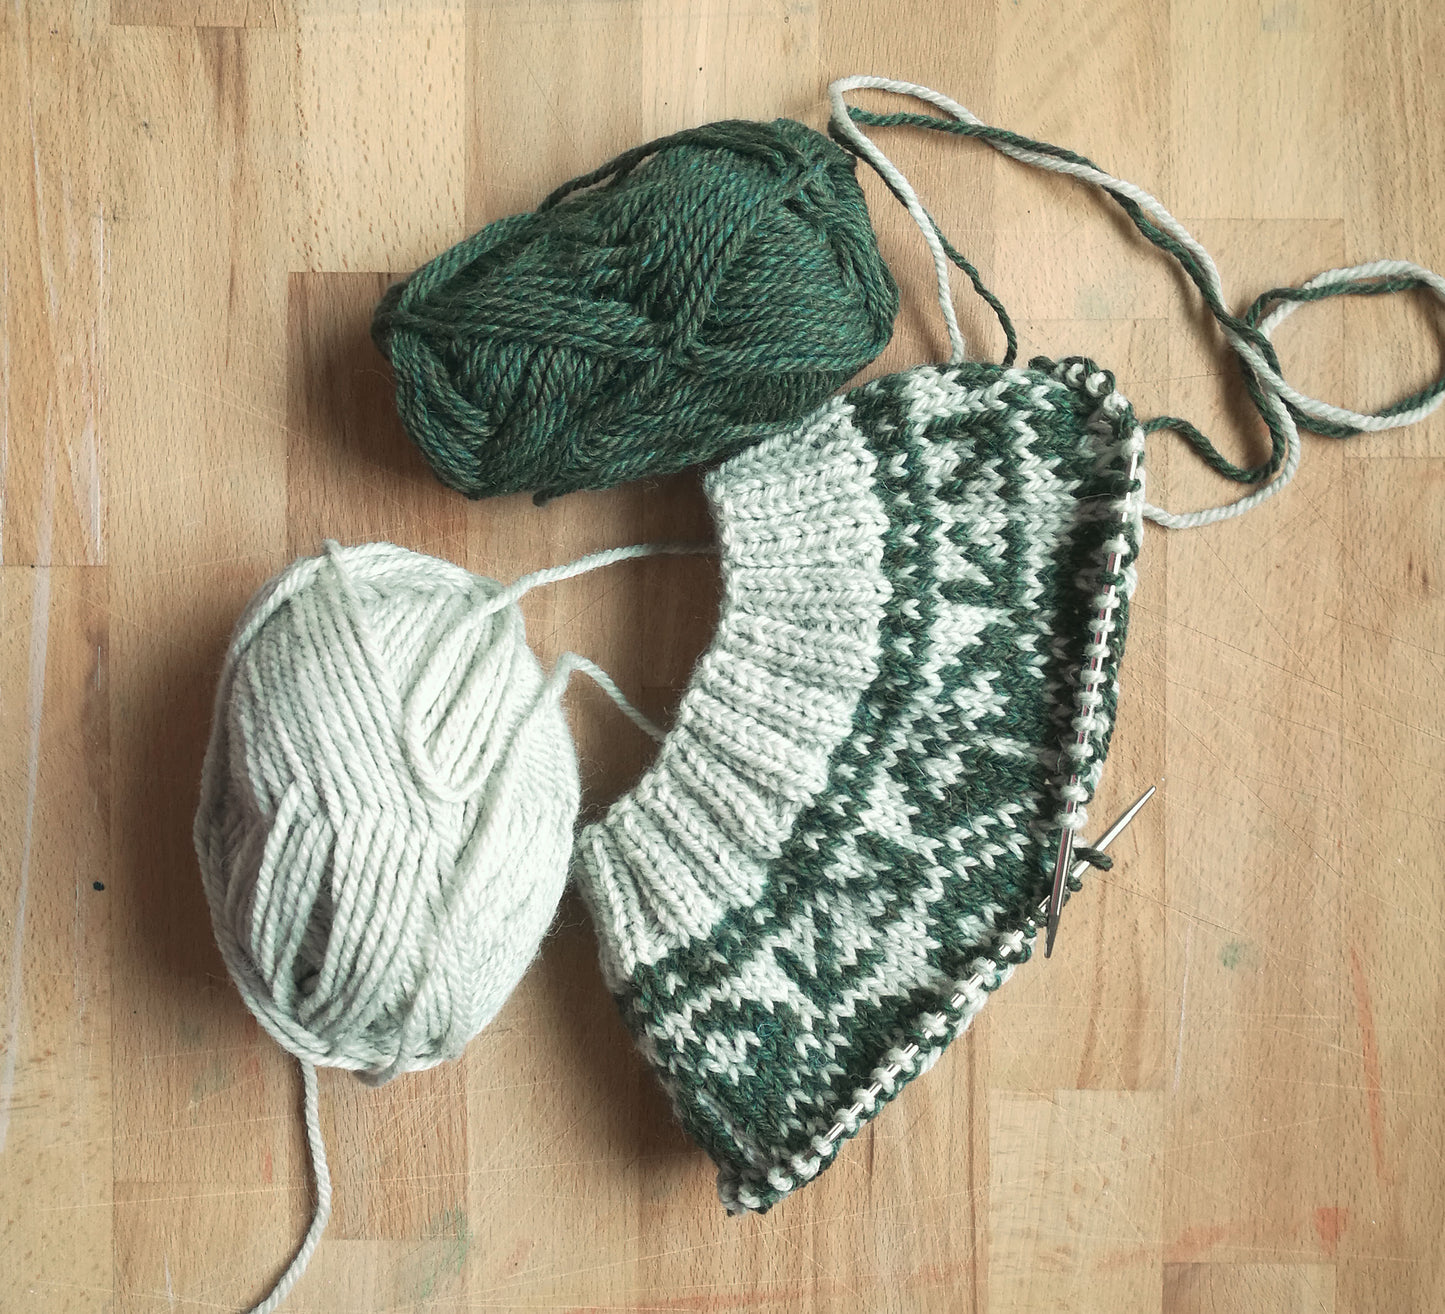 beige and green wool hand-knitted Fair Isle beanie hat in snowflake knitting pattern in progress with needles and yarn balls